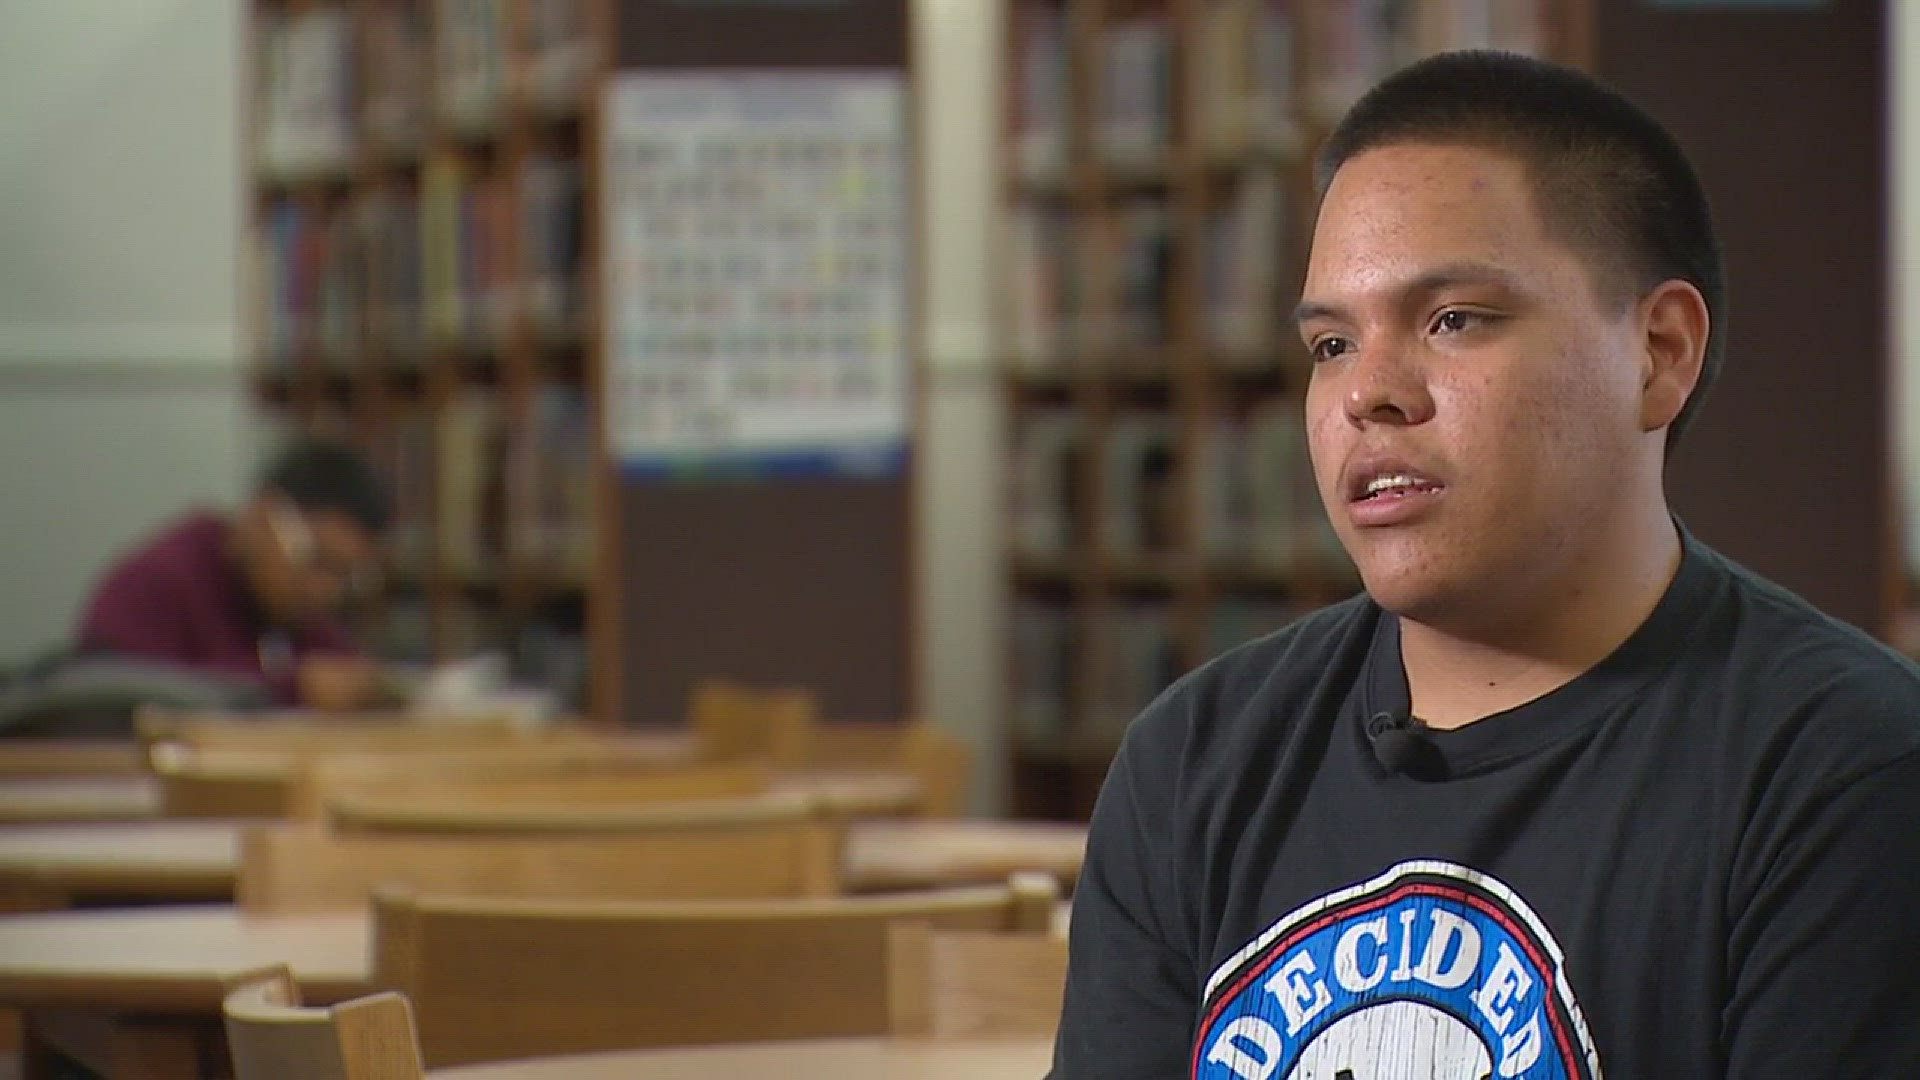 Homeless high schooler sees options, not obstacles